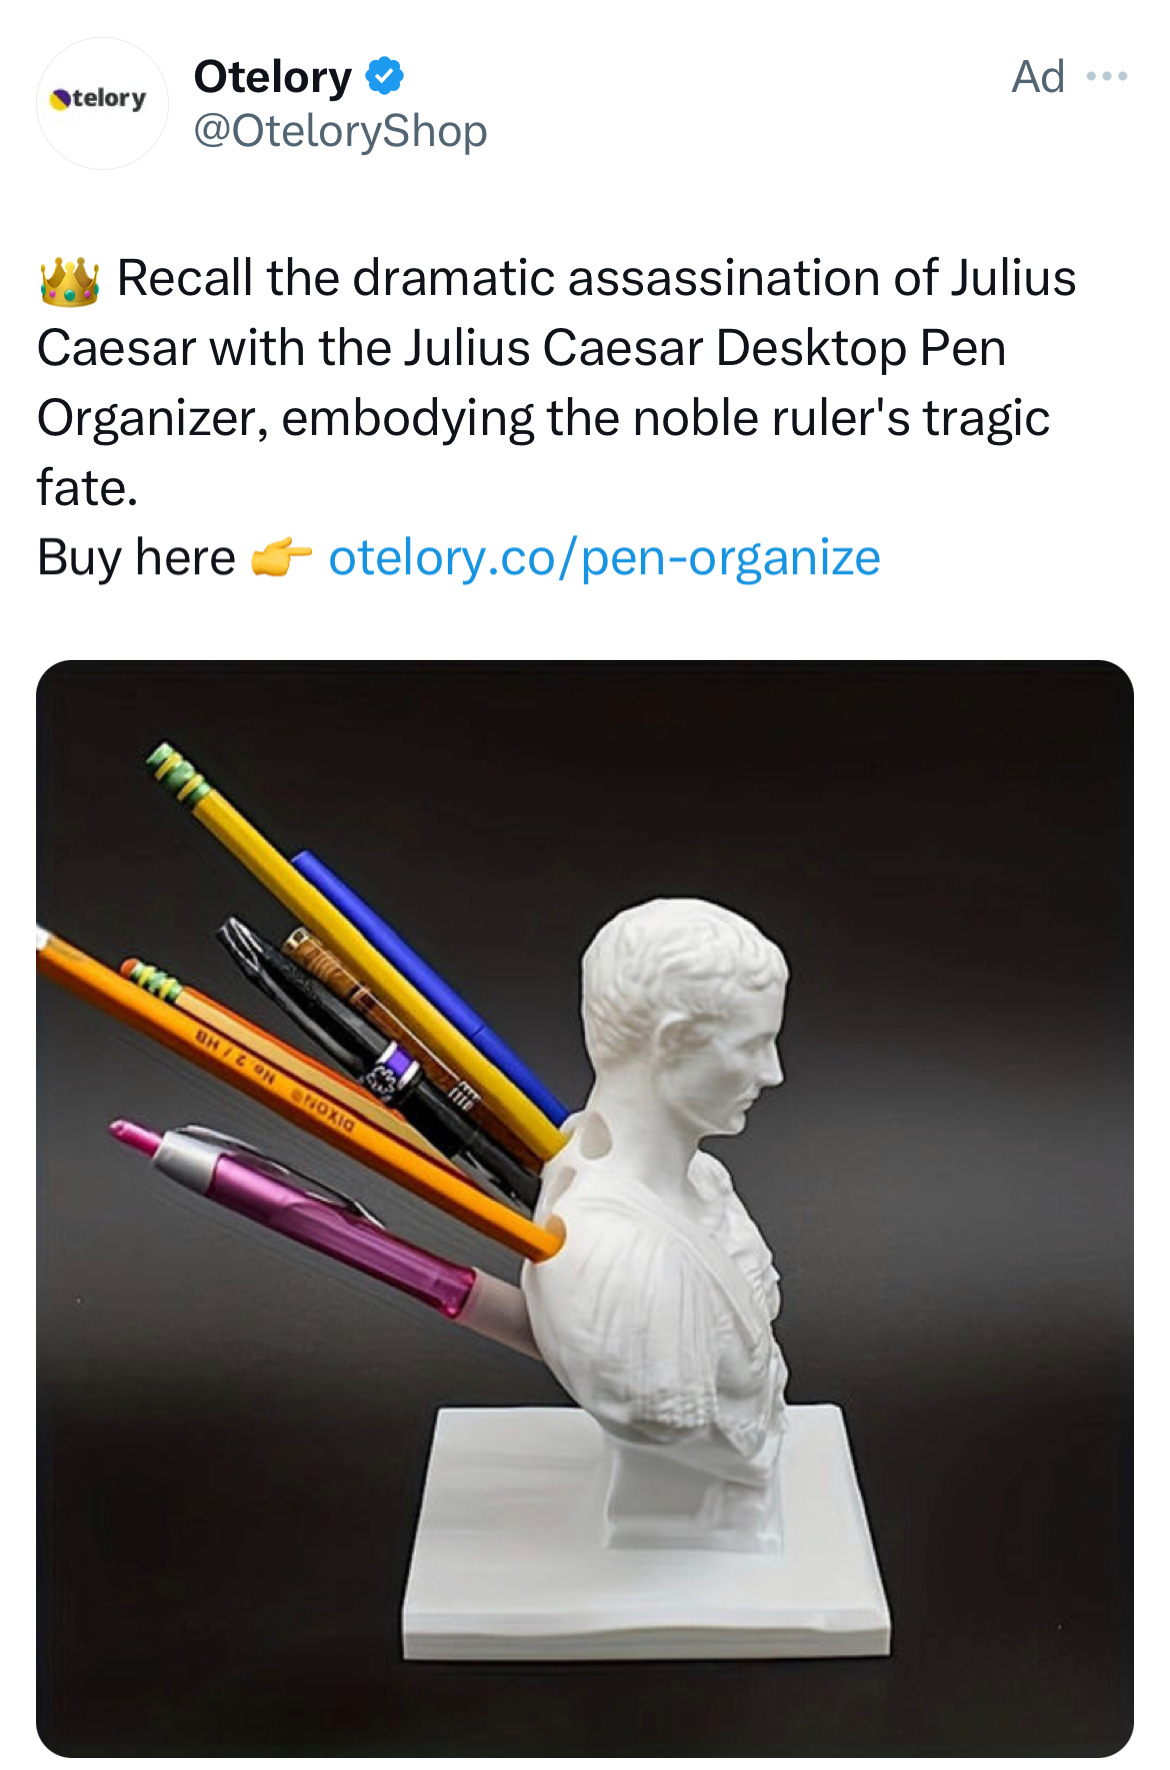 A Twitter ad from Otelory, a dropping shipping company saying "Recall the dramatic assassination of Julius Caesar with the Julius Caesar Desktop Pen Organizer, embodying the noble ruler's tragic fate." The image is of a white bust of Julius Caesar with pens and pencils stuck into the back of it.